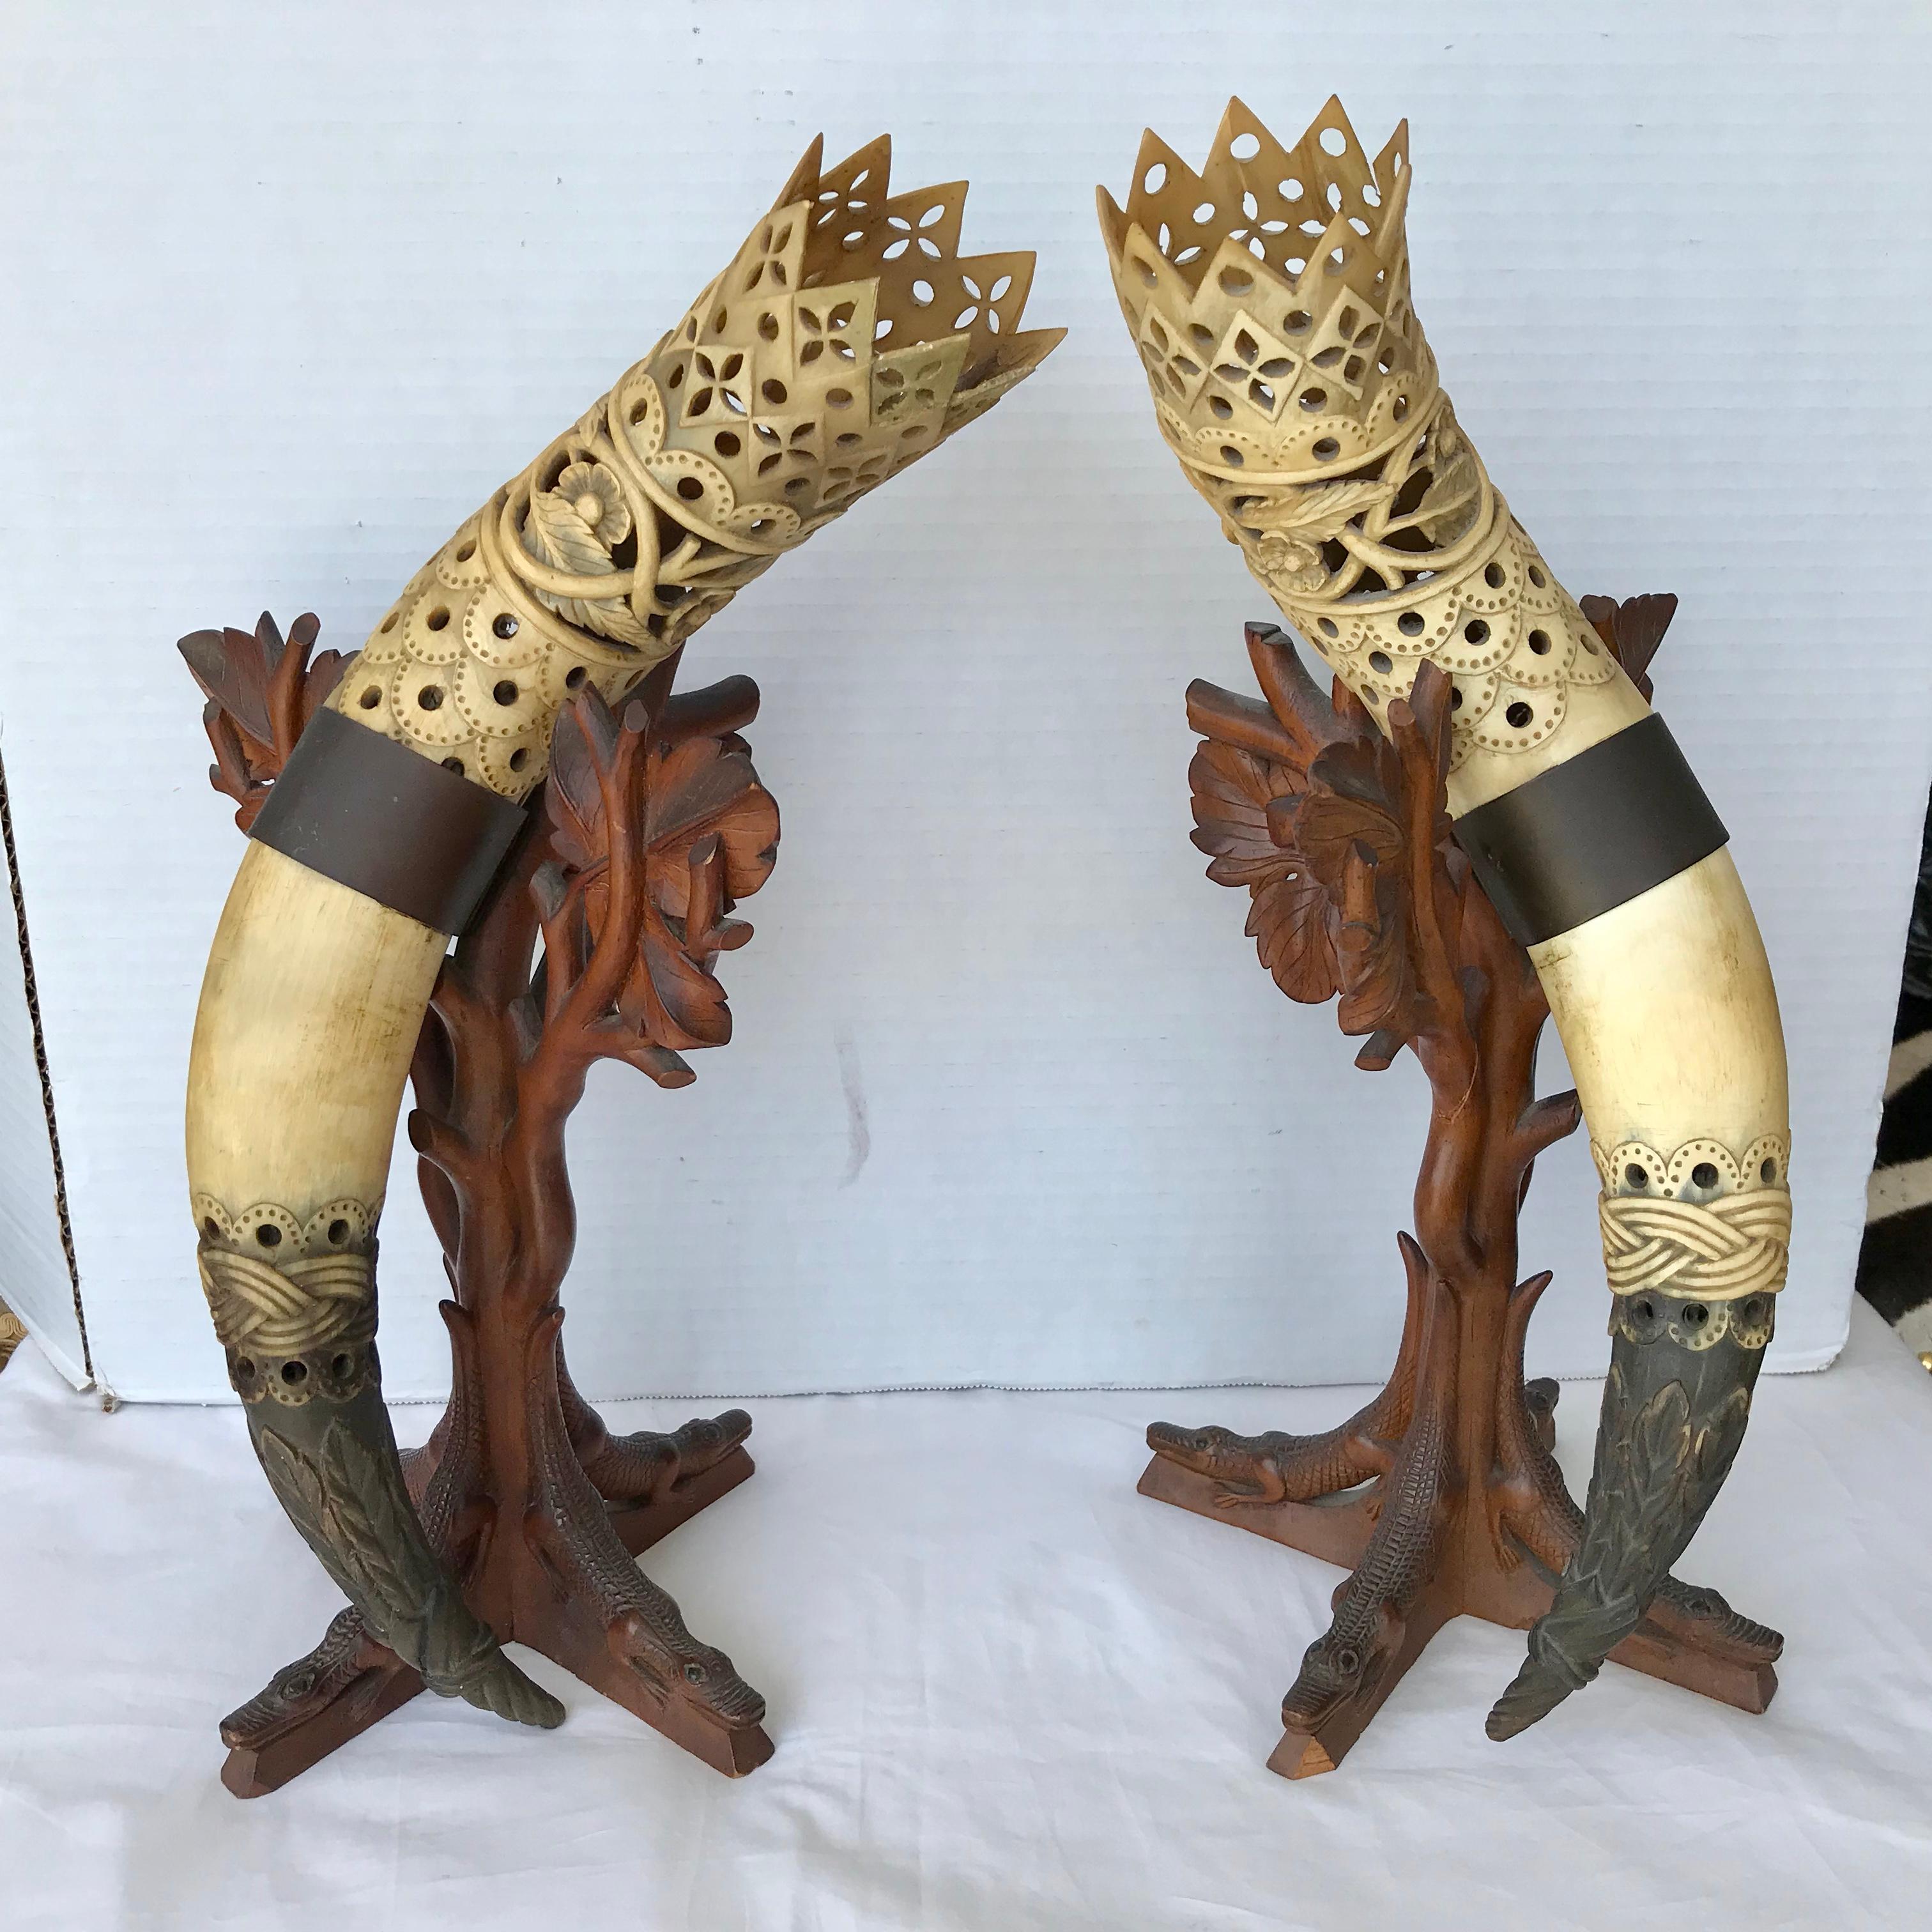 The horns are elaborately carved and mounted in carved wood stands
which terminate with figures of crocodiles.
A rare and unusual pair.